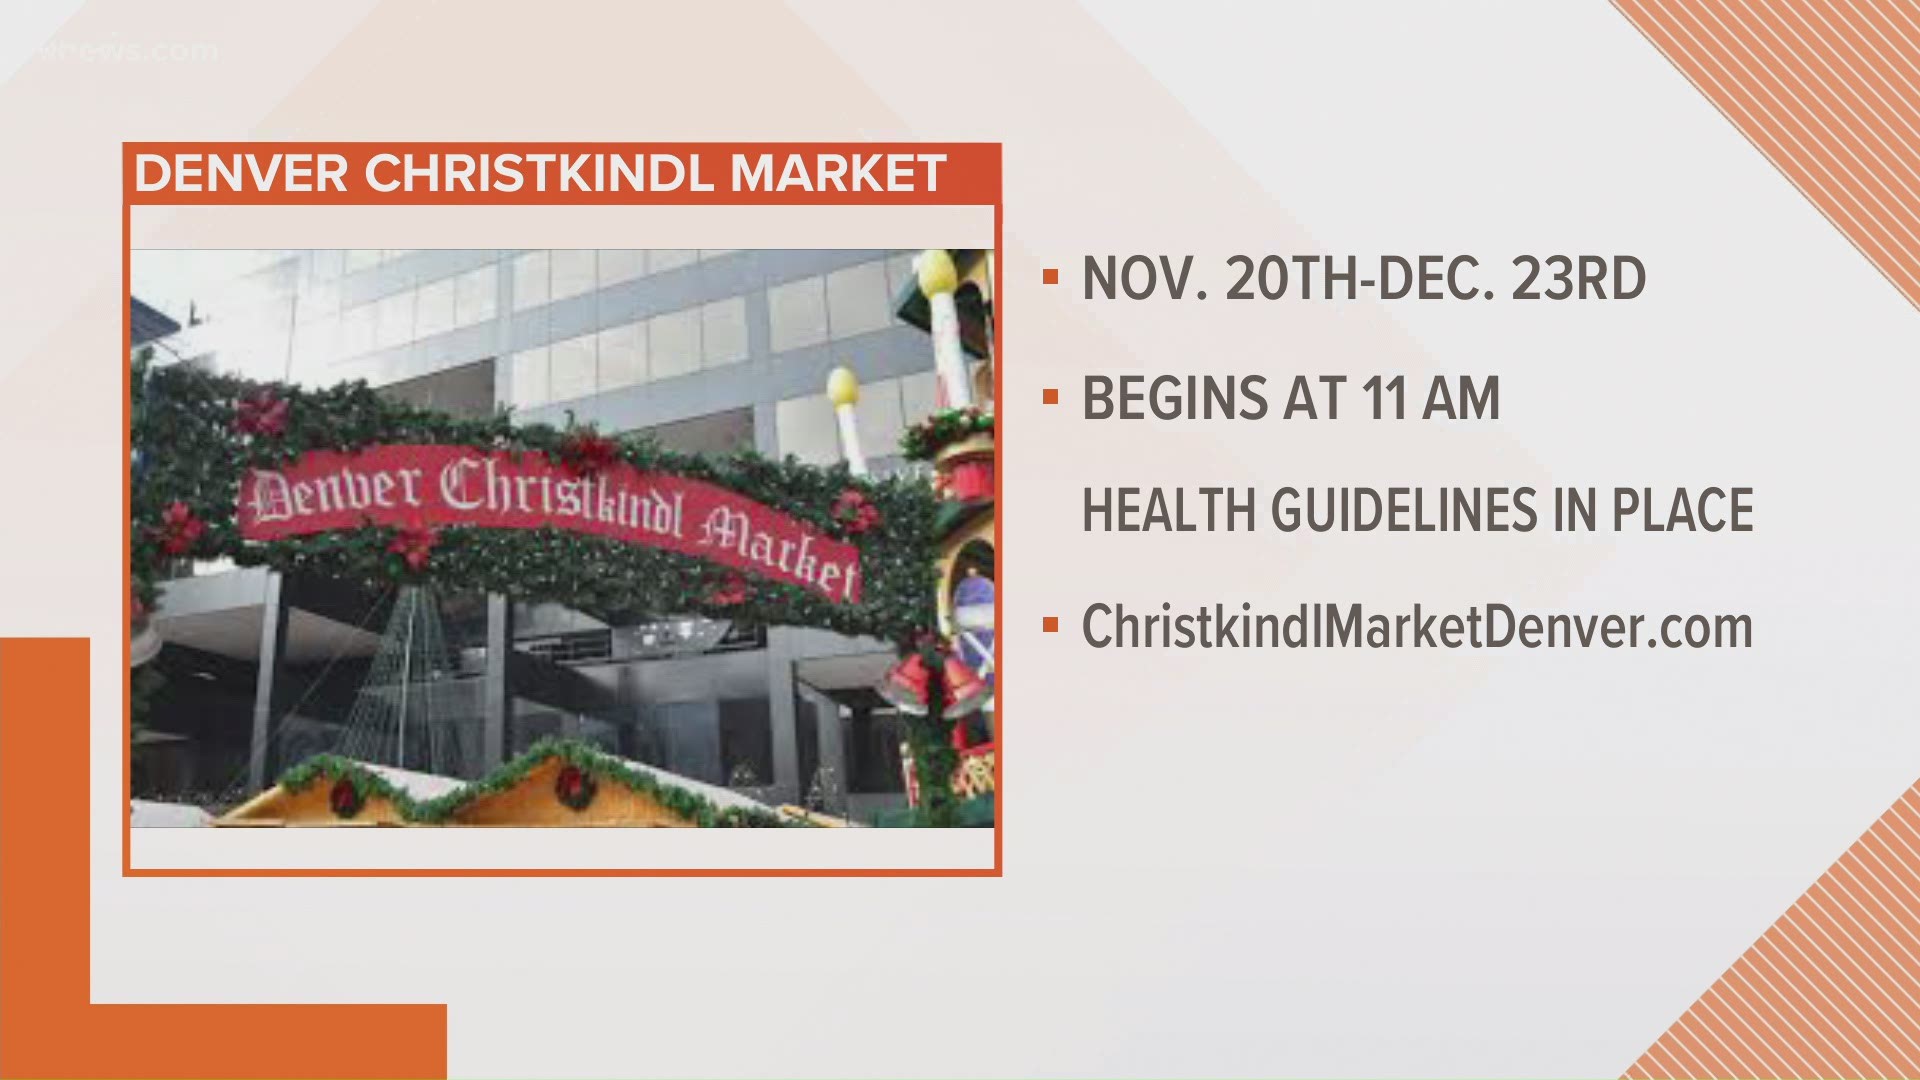 Williams Reed talks about changes made for the 2020 Denver Christkindl Market due to COVID-19.